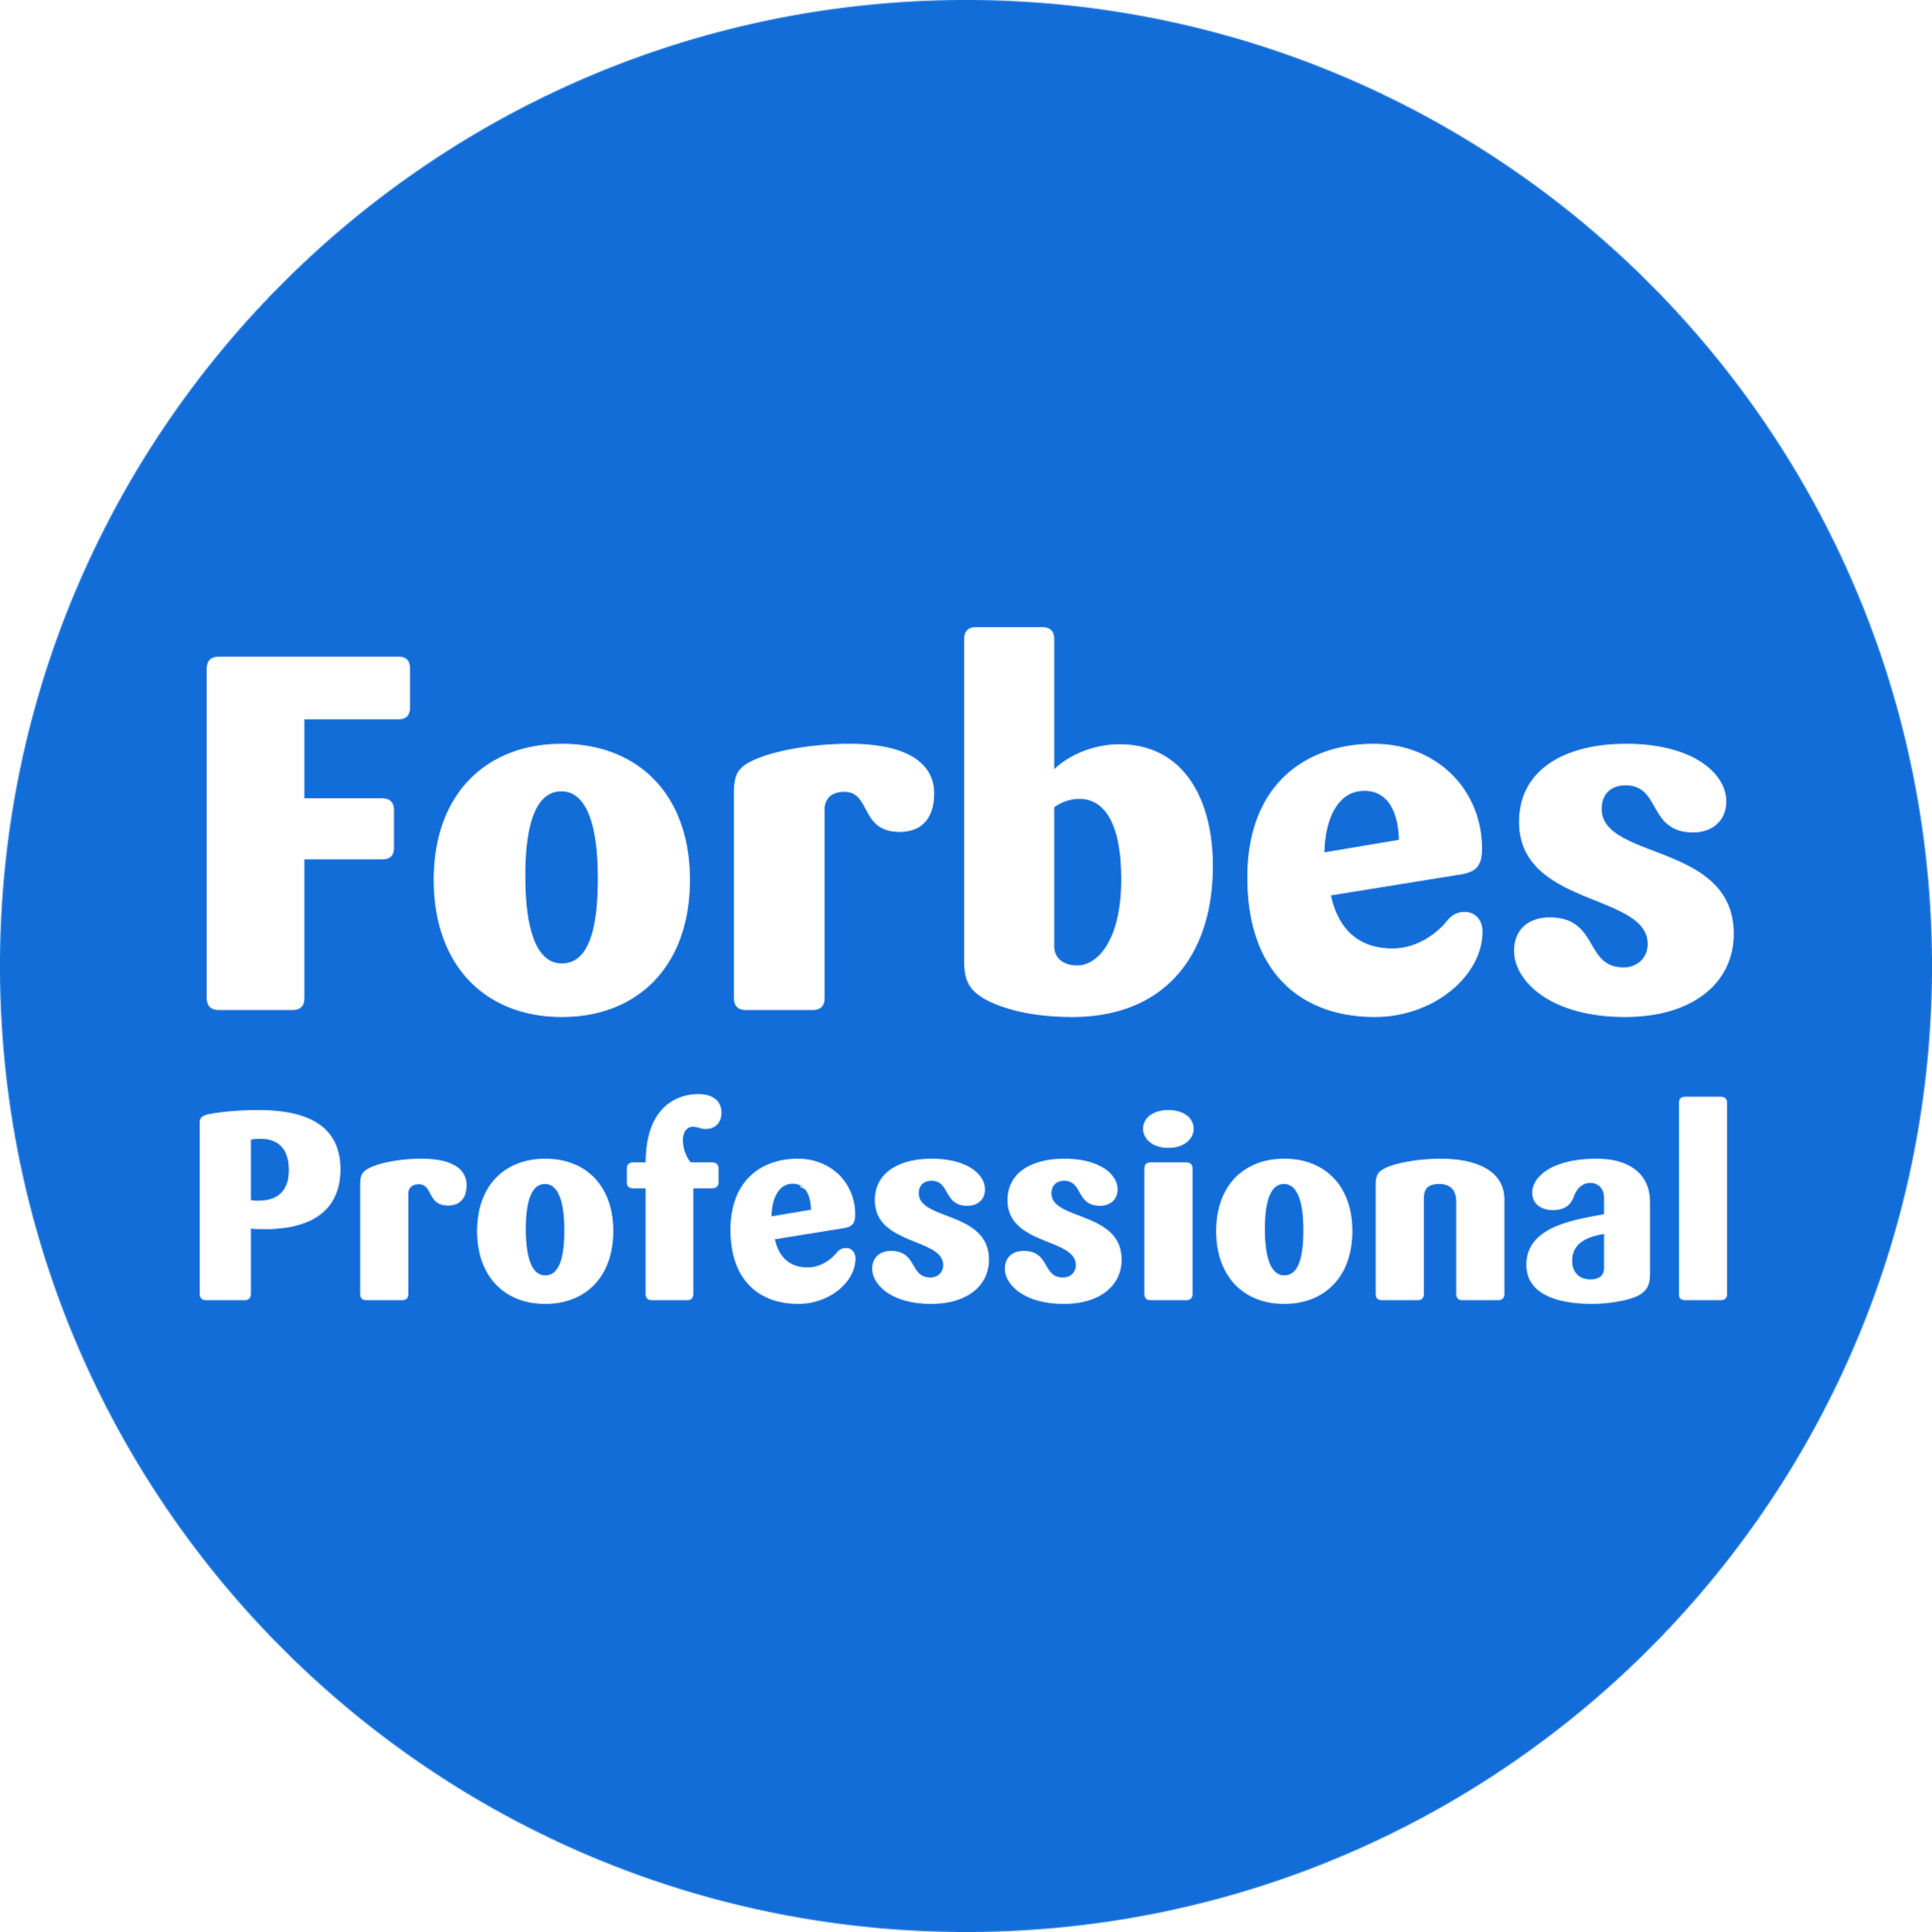 Forbes Professional Logo